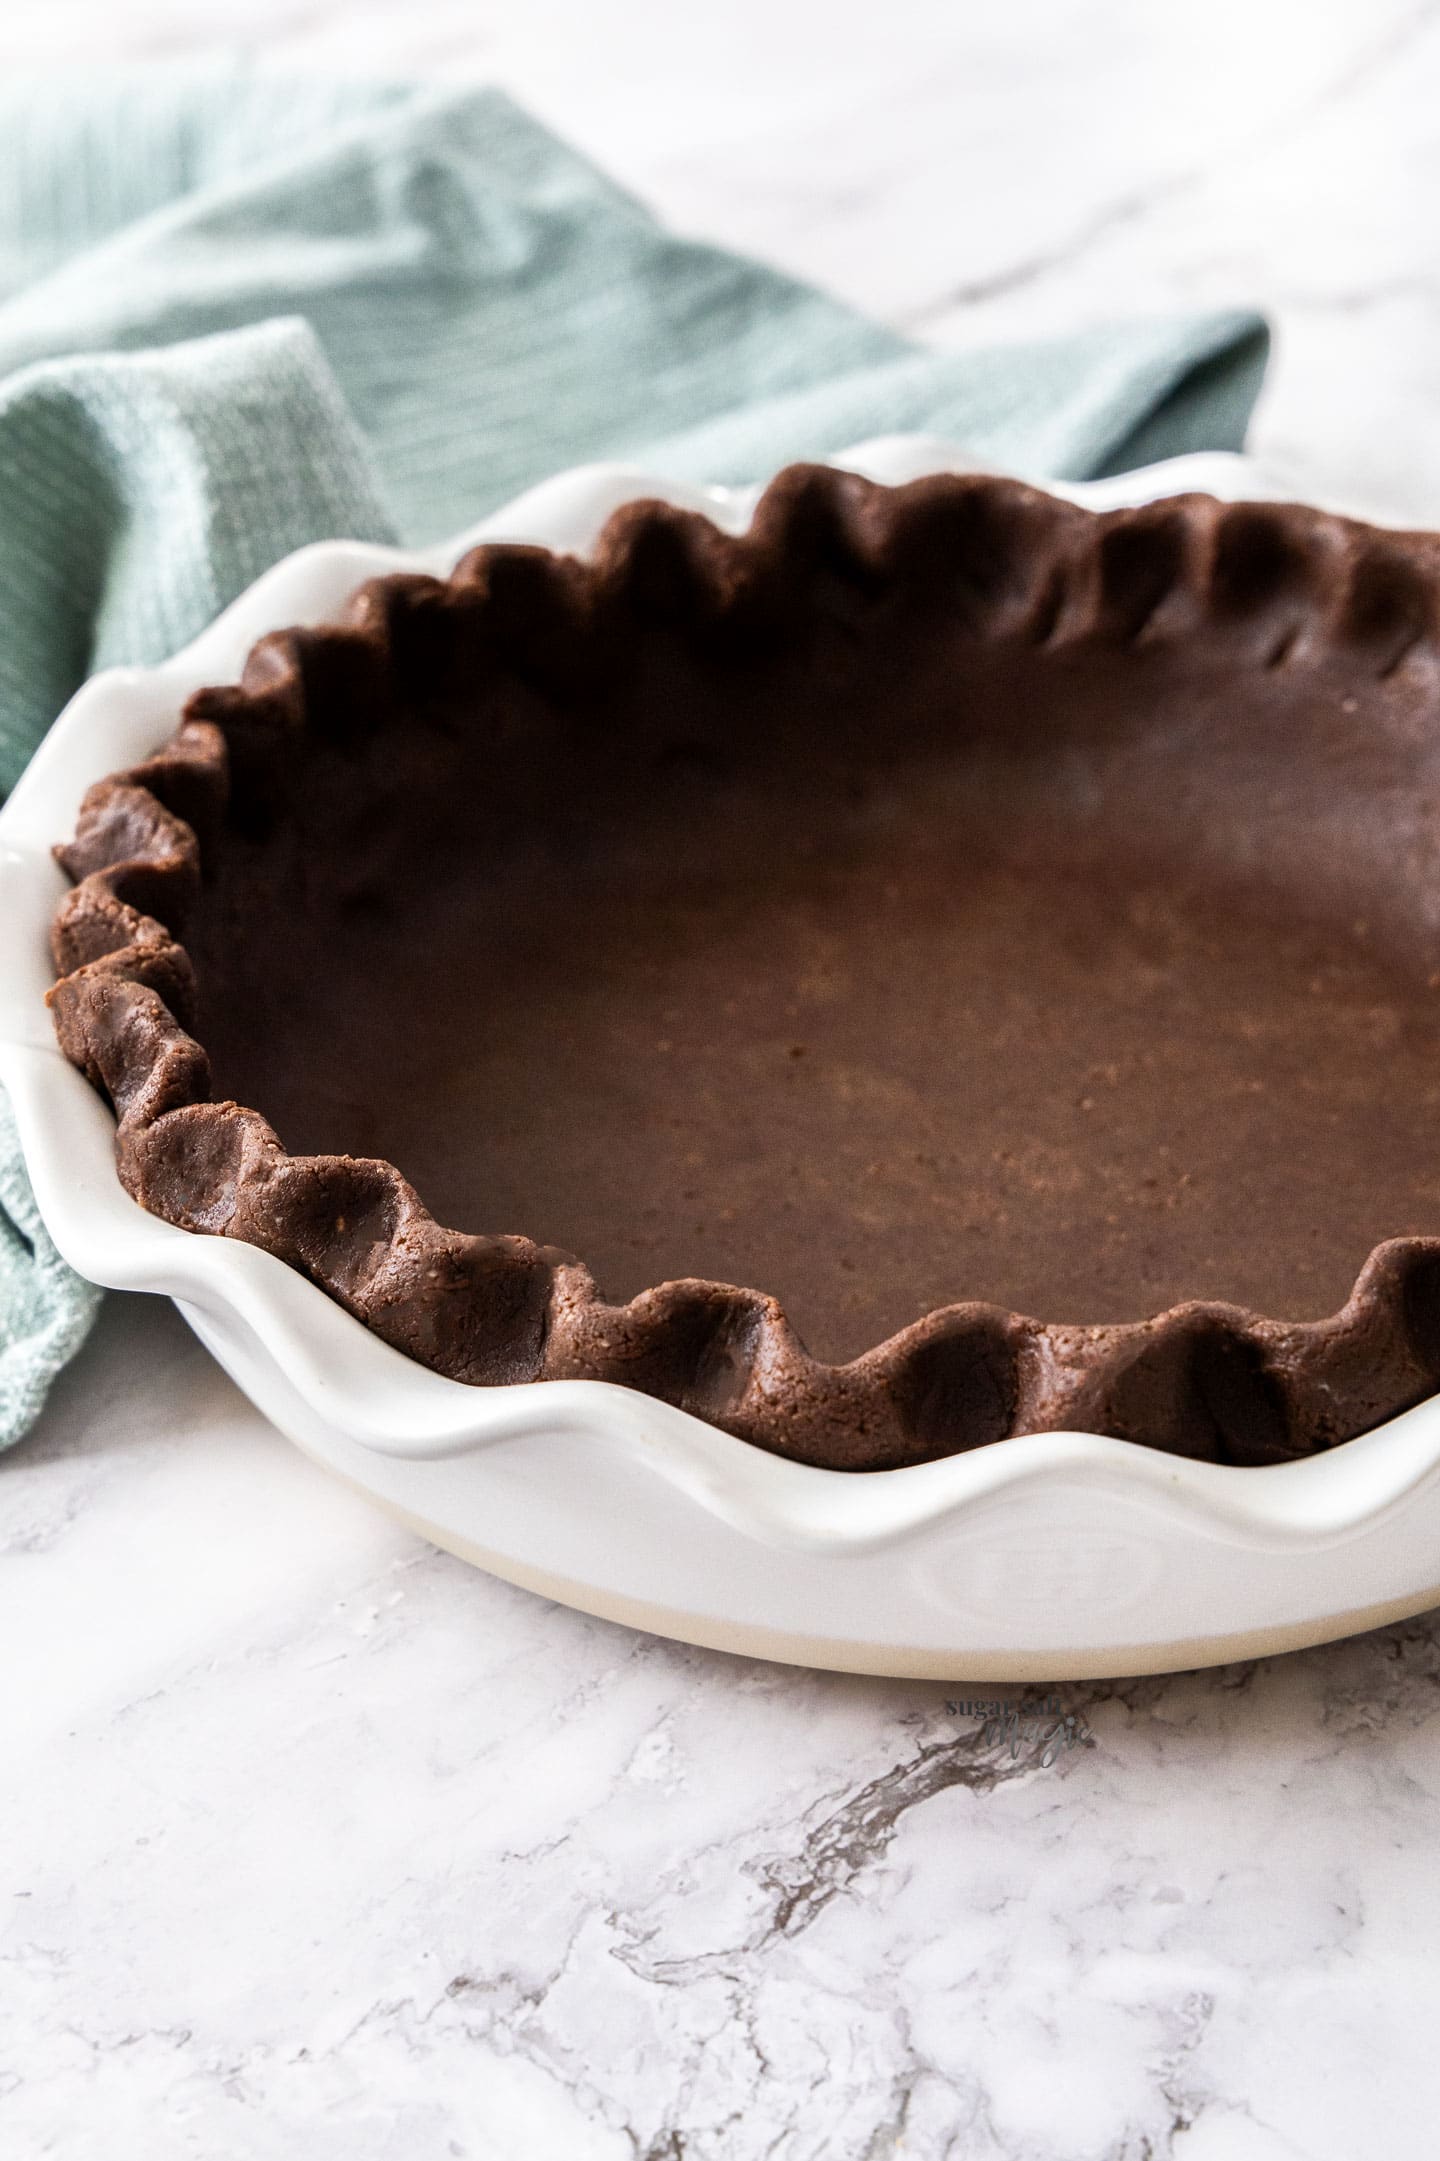 Chocolate pie crust, unbaked, shown at a 45 degree angle.